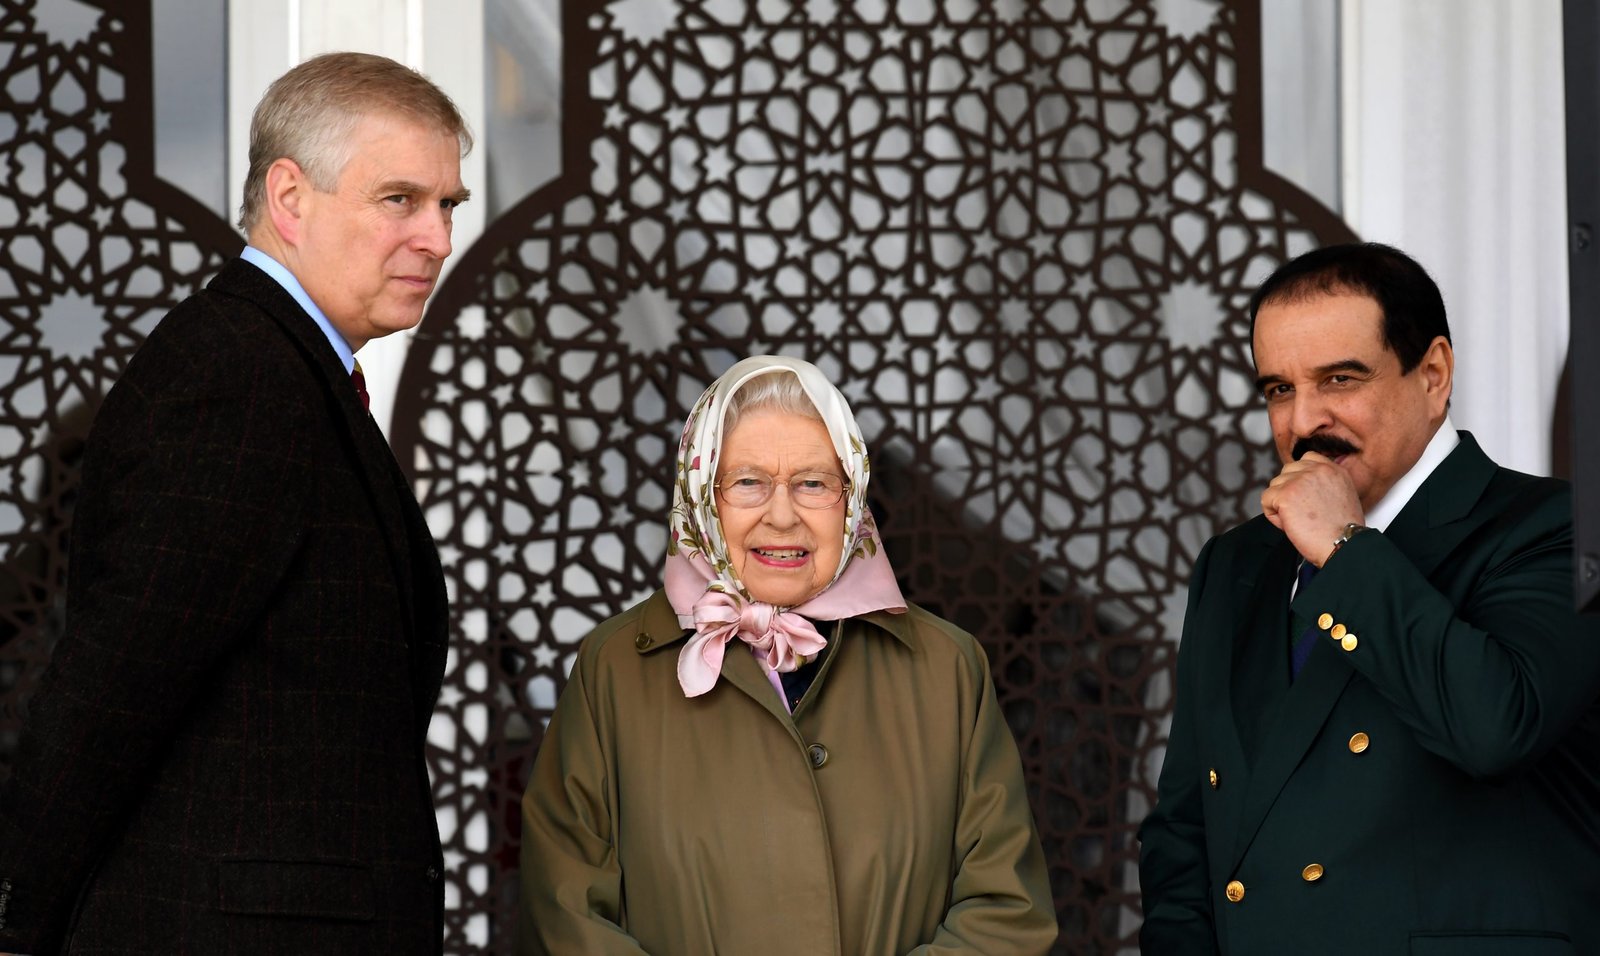 HOW THE BRITISH ESTABLISHMENT IS WORKING TO KEEP BAHRAIN’S RULING FAMILY IN POWER